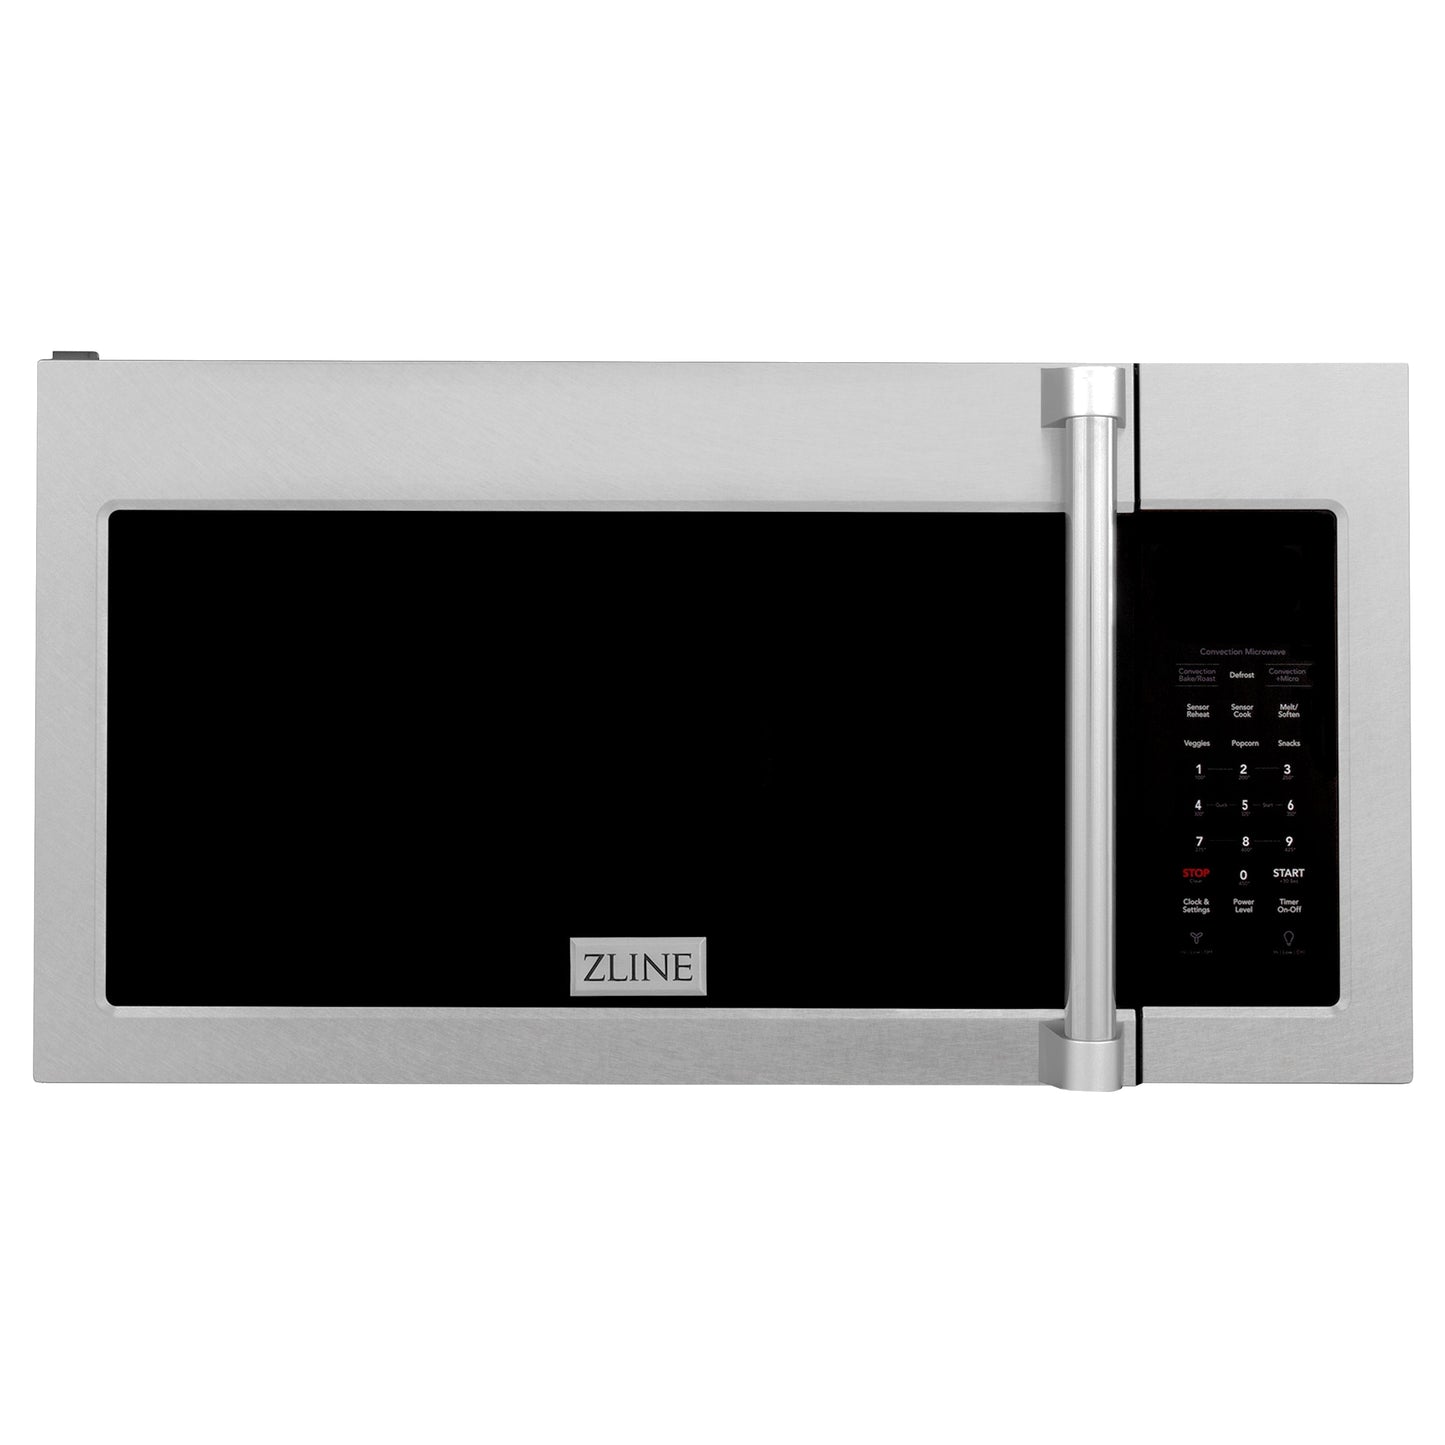 ZLINE 30" Over the Range Convection Microwave Oven with Sensor Cooking (MWO-OTR)